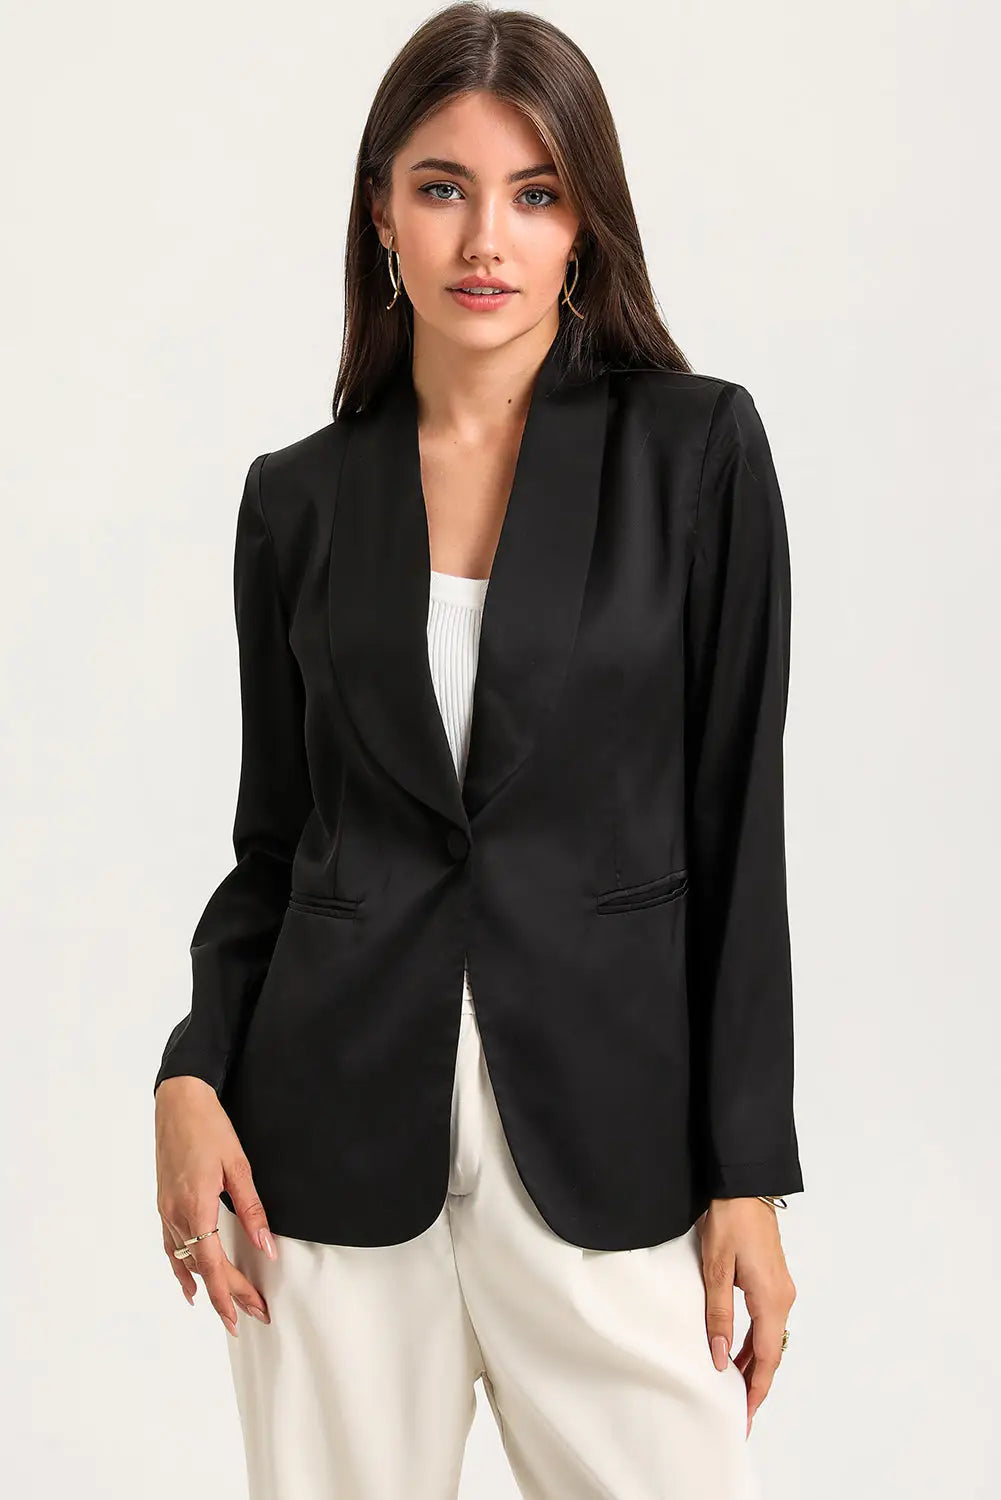 Black collared neck single breasted blazer with pockets - s